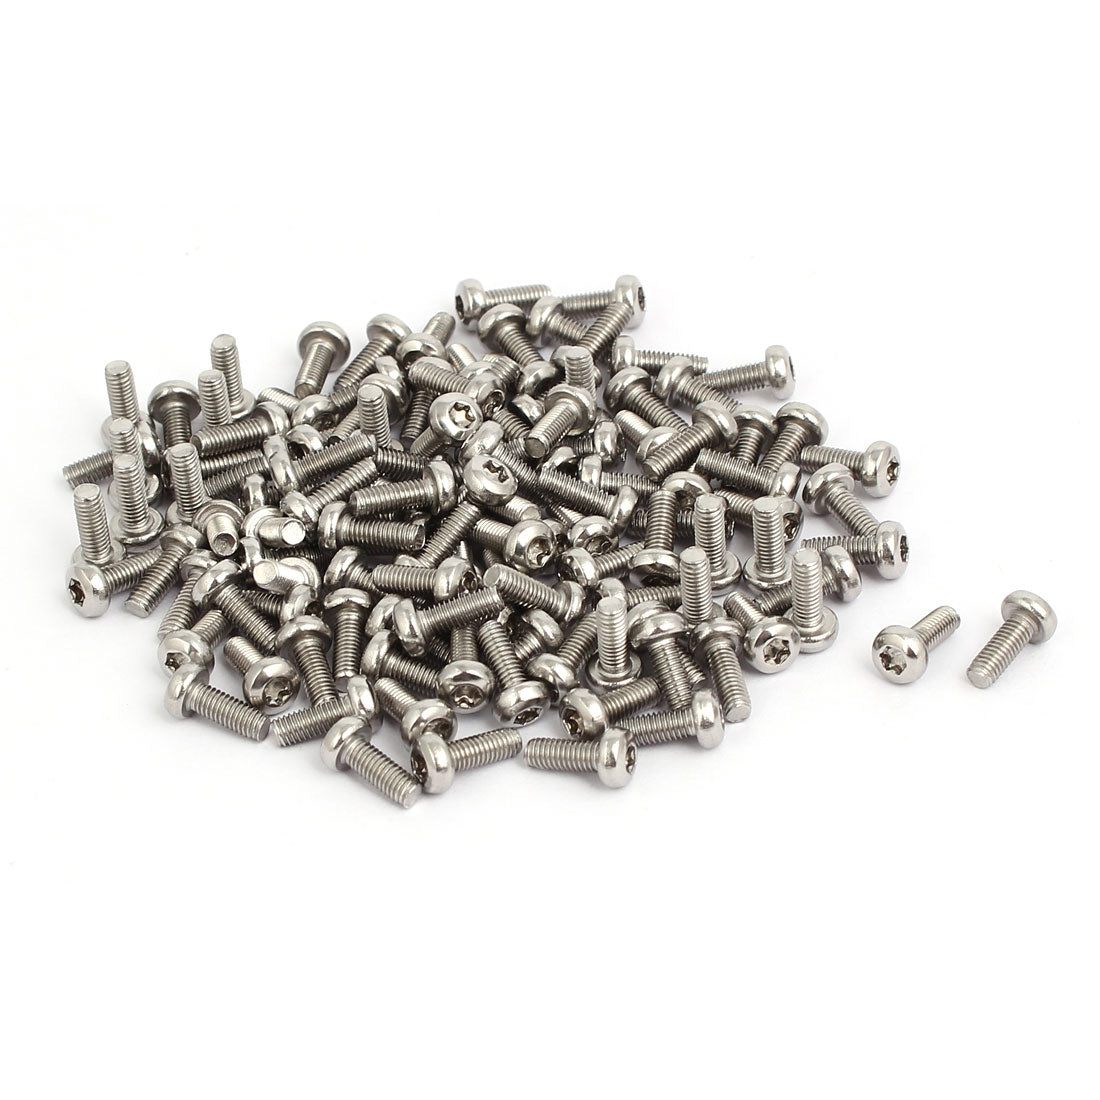 uxcell Uxcell M3x8mm 304 Stainless Steel Button Head Torx Screws Fasteners 120pcs